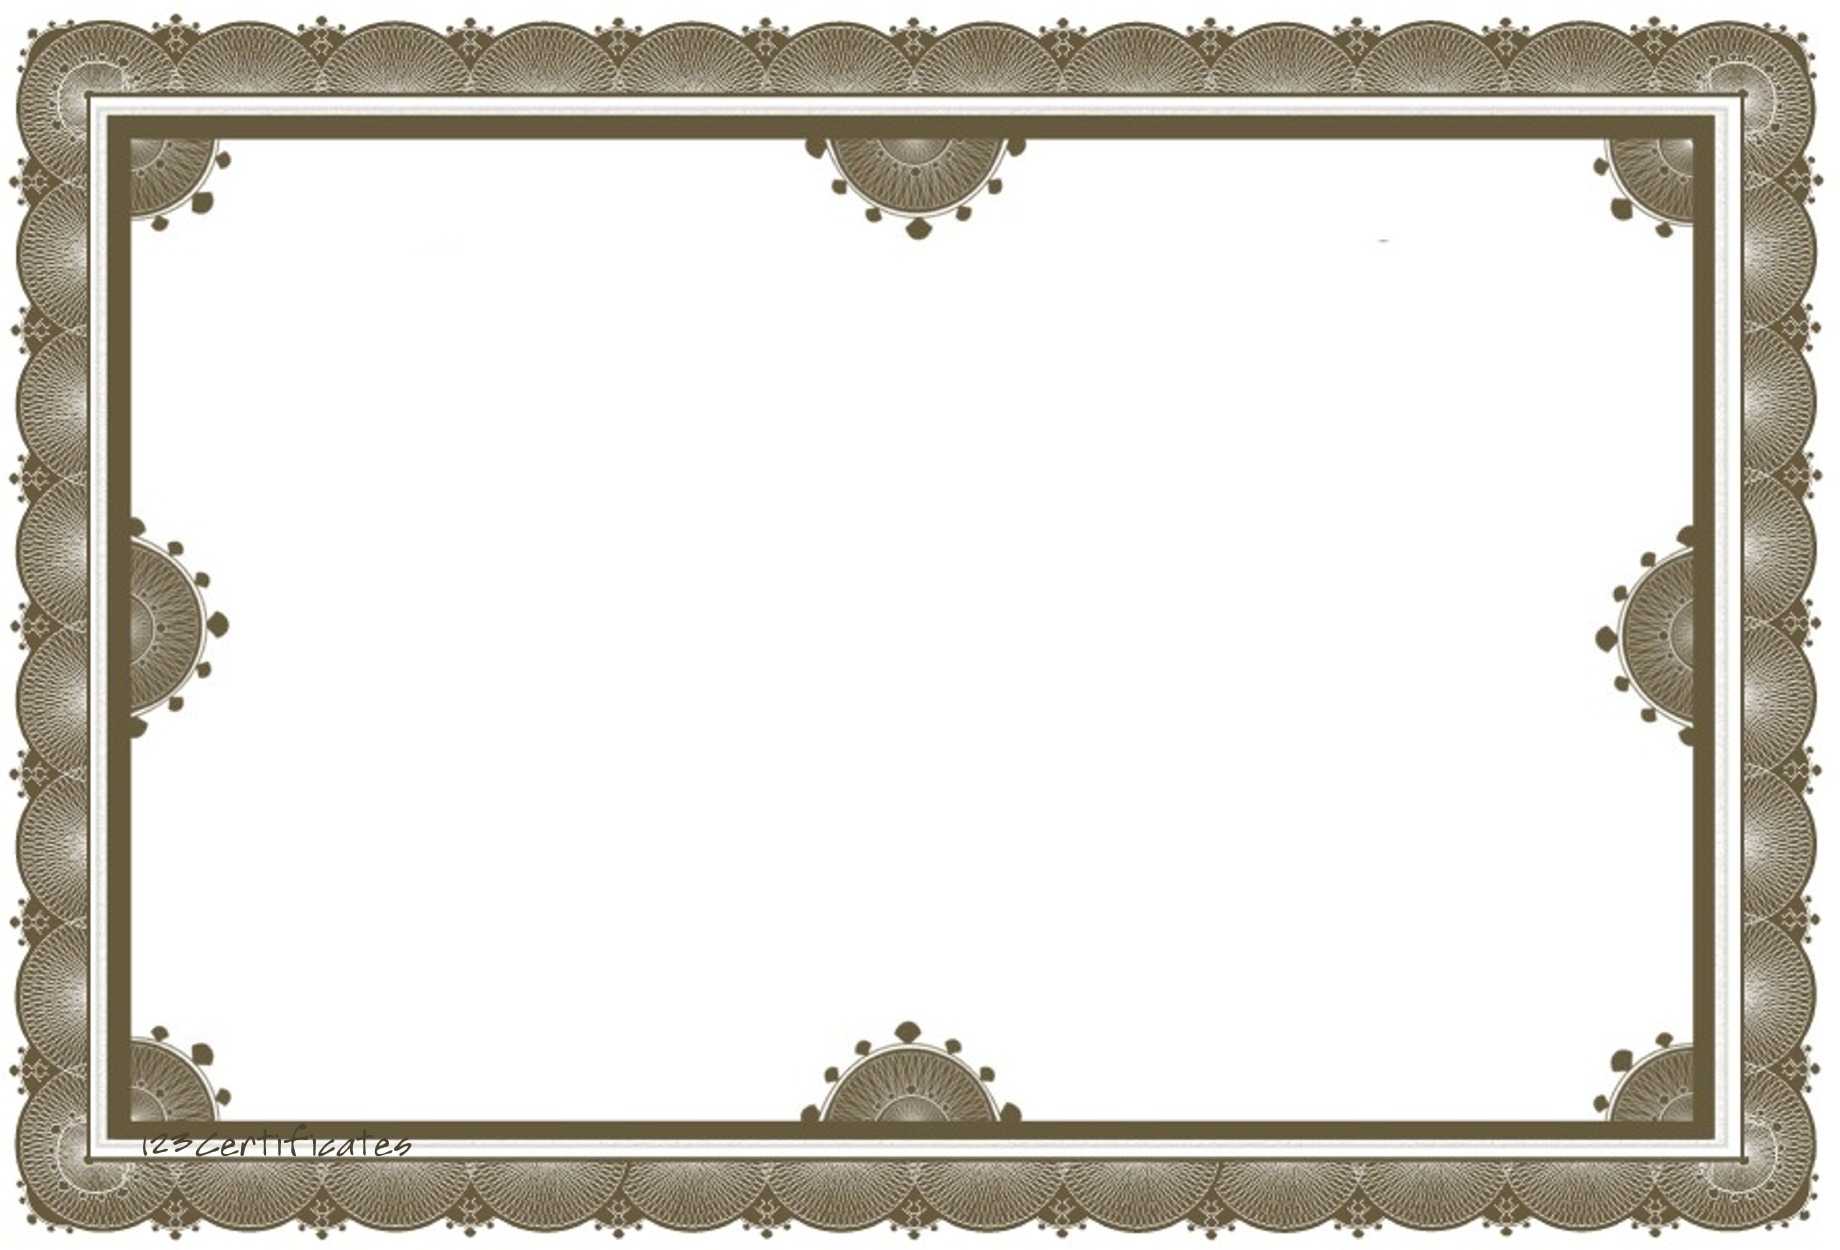 Free Certificate Borders And Frames, Download Free Clip Art Intended For Certificate Border Design Templates